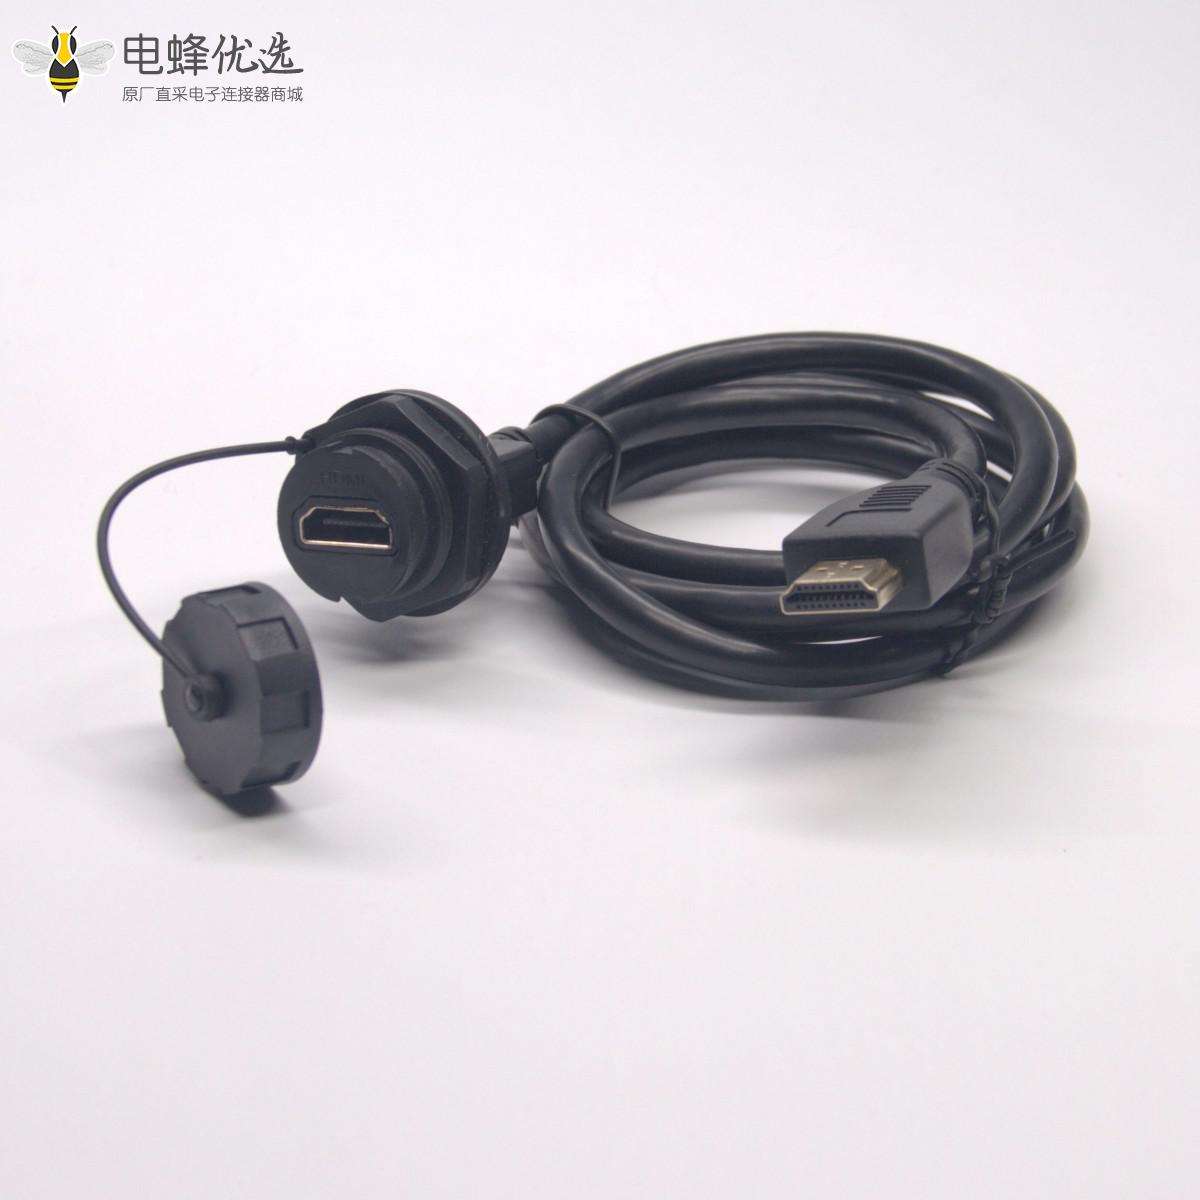 HDMI 公 转 HDMI 母 防水 线长100cm IP67 Waterproof cable